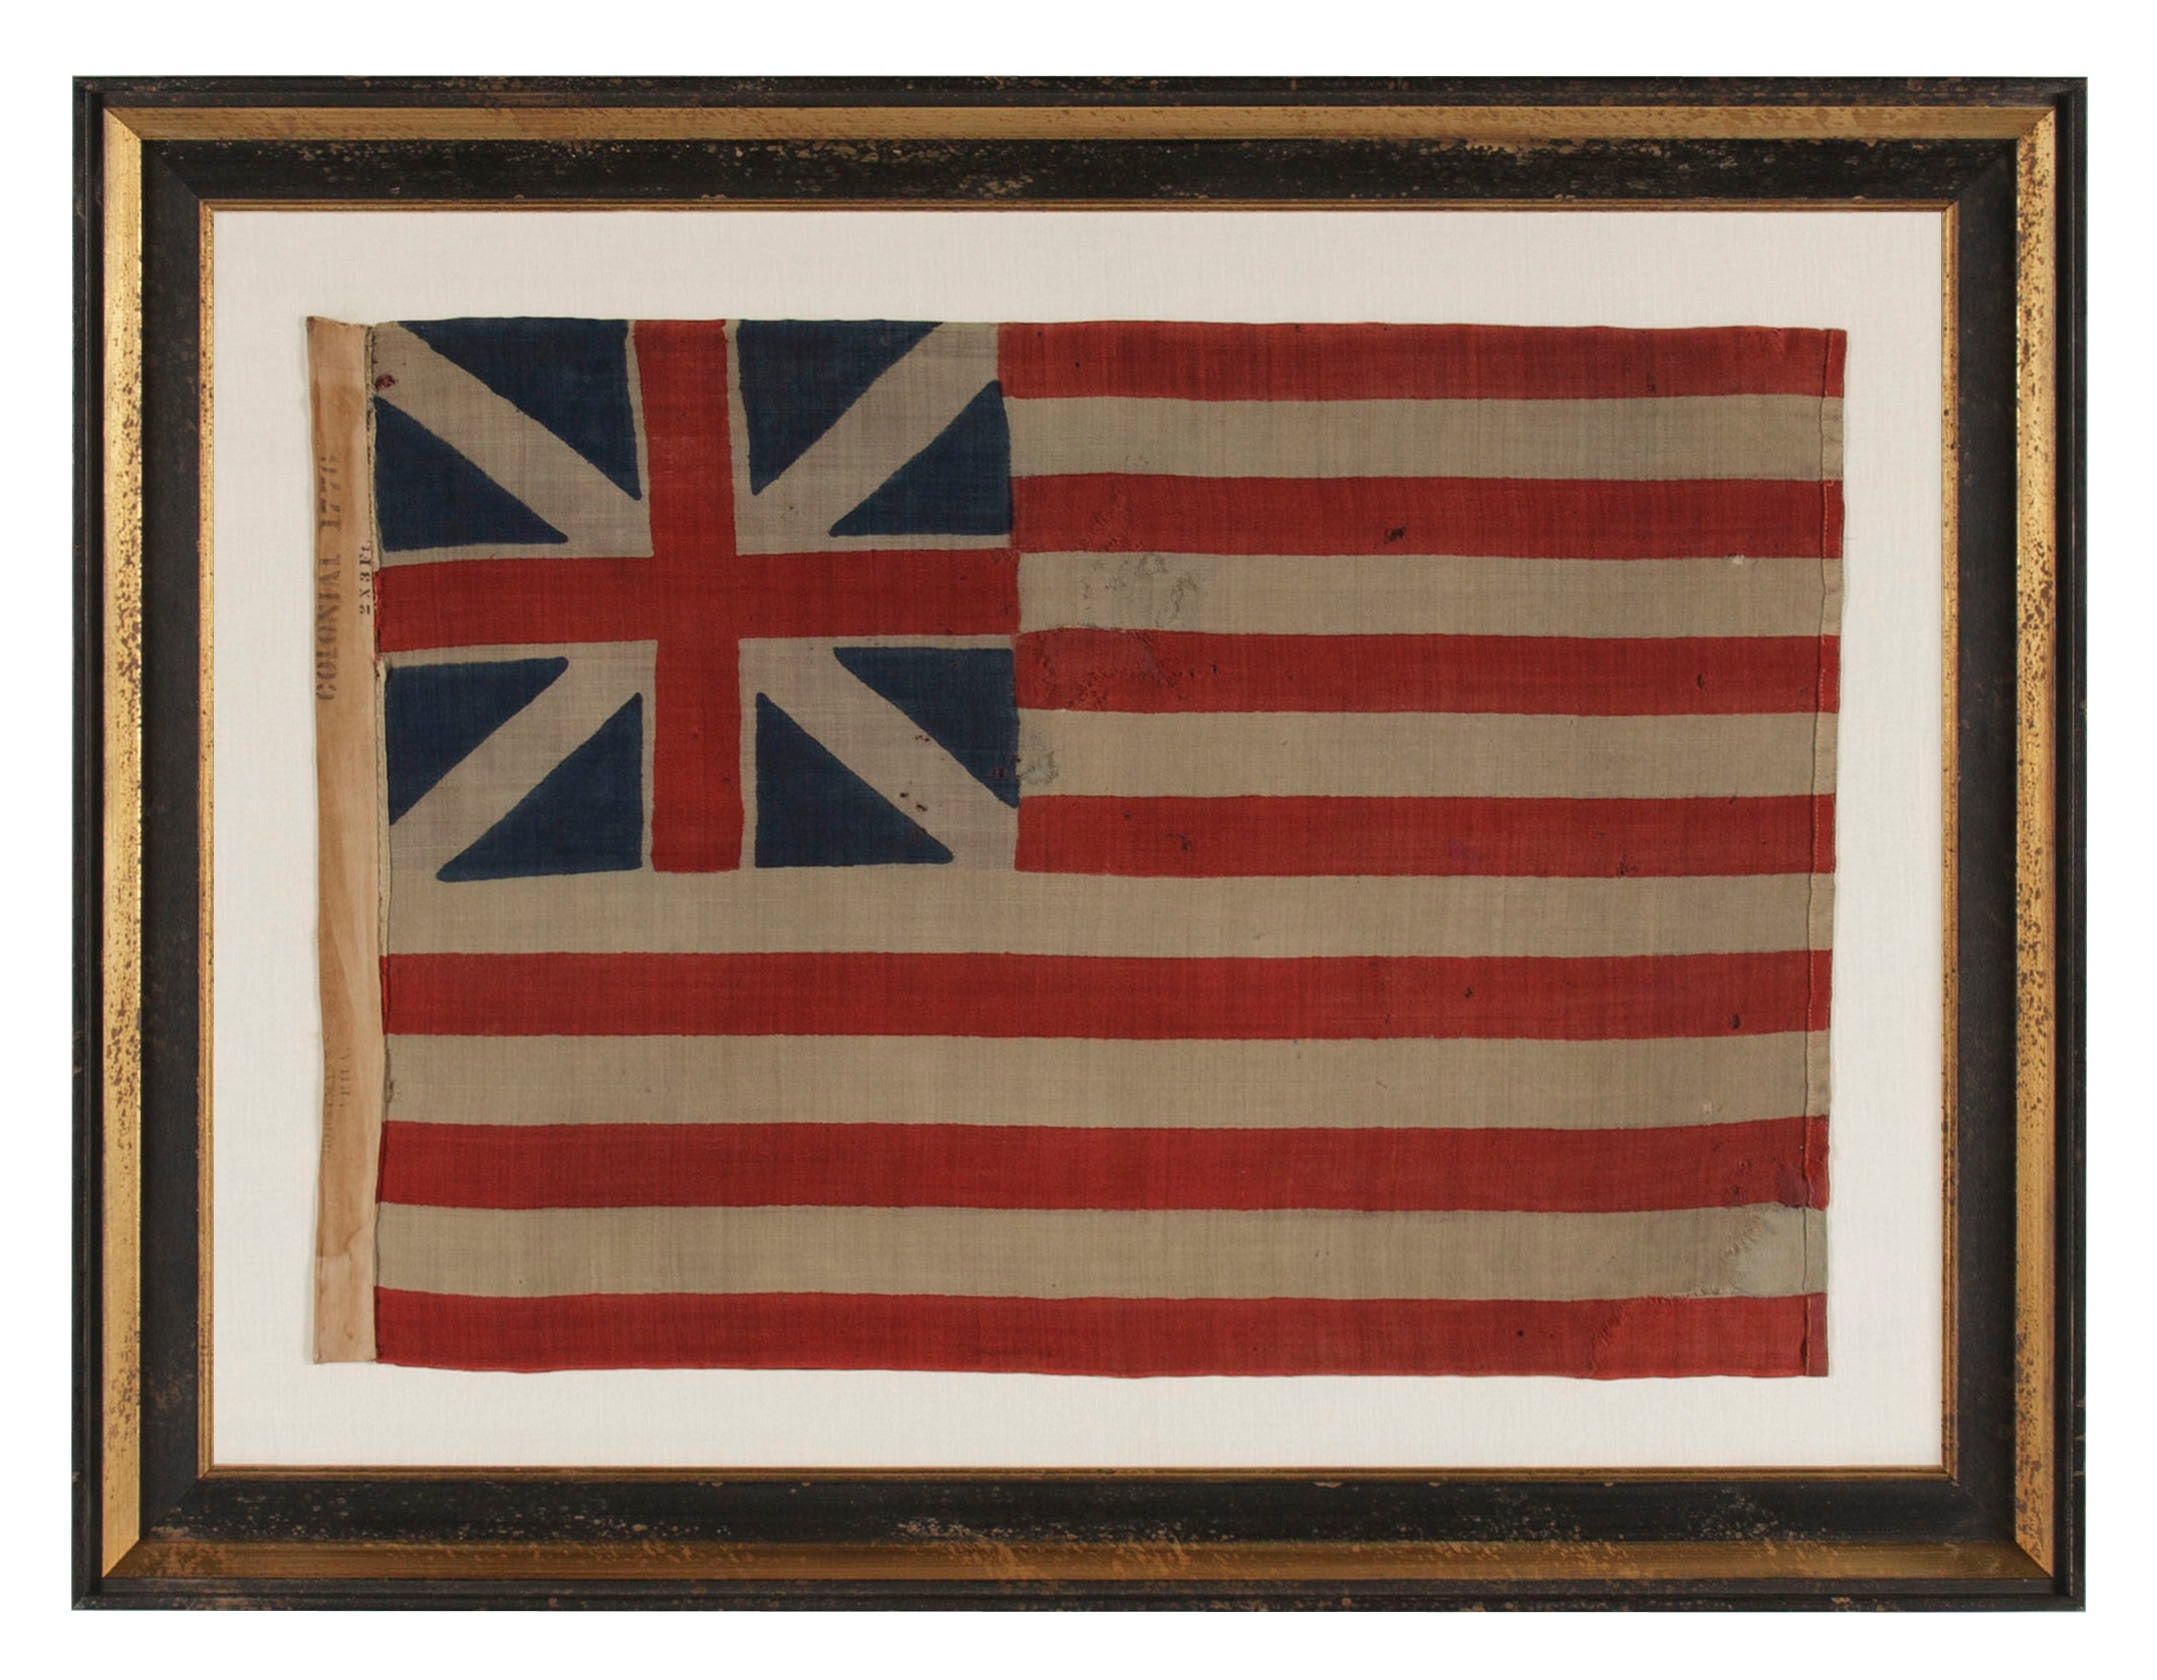 Antique1876 Example of the First National Flag of America, The "Grand Union"